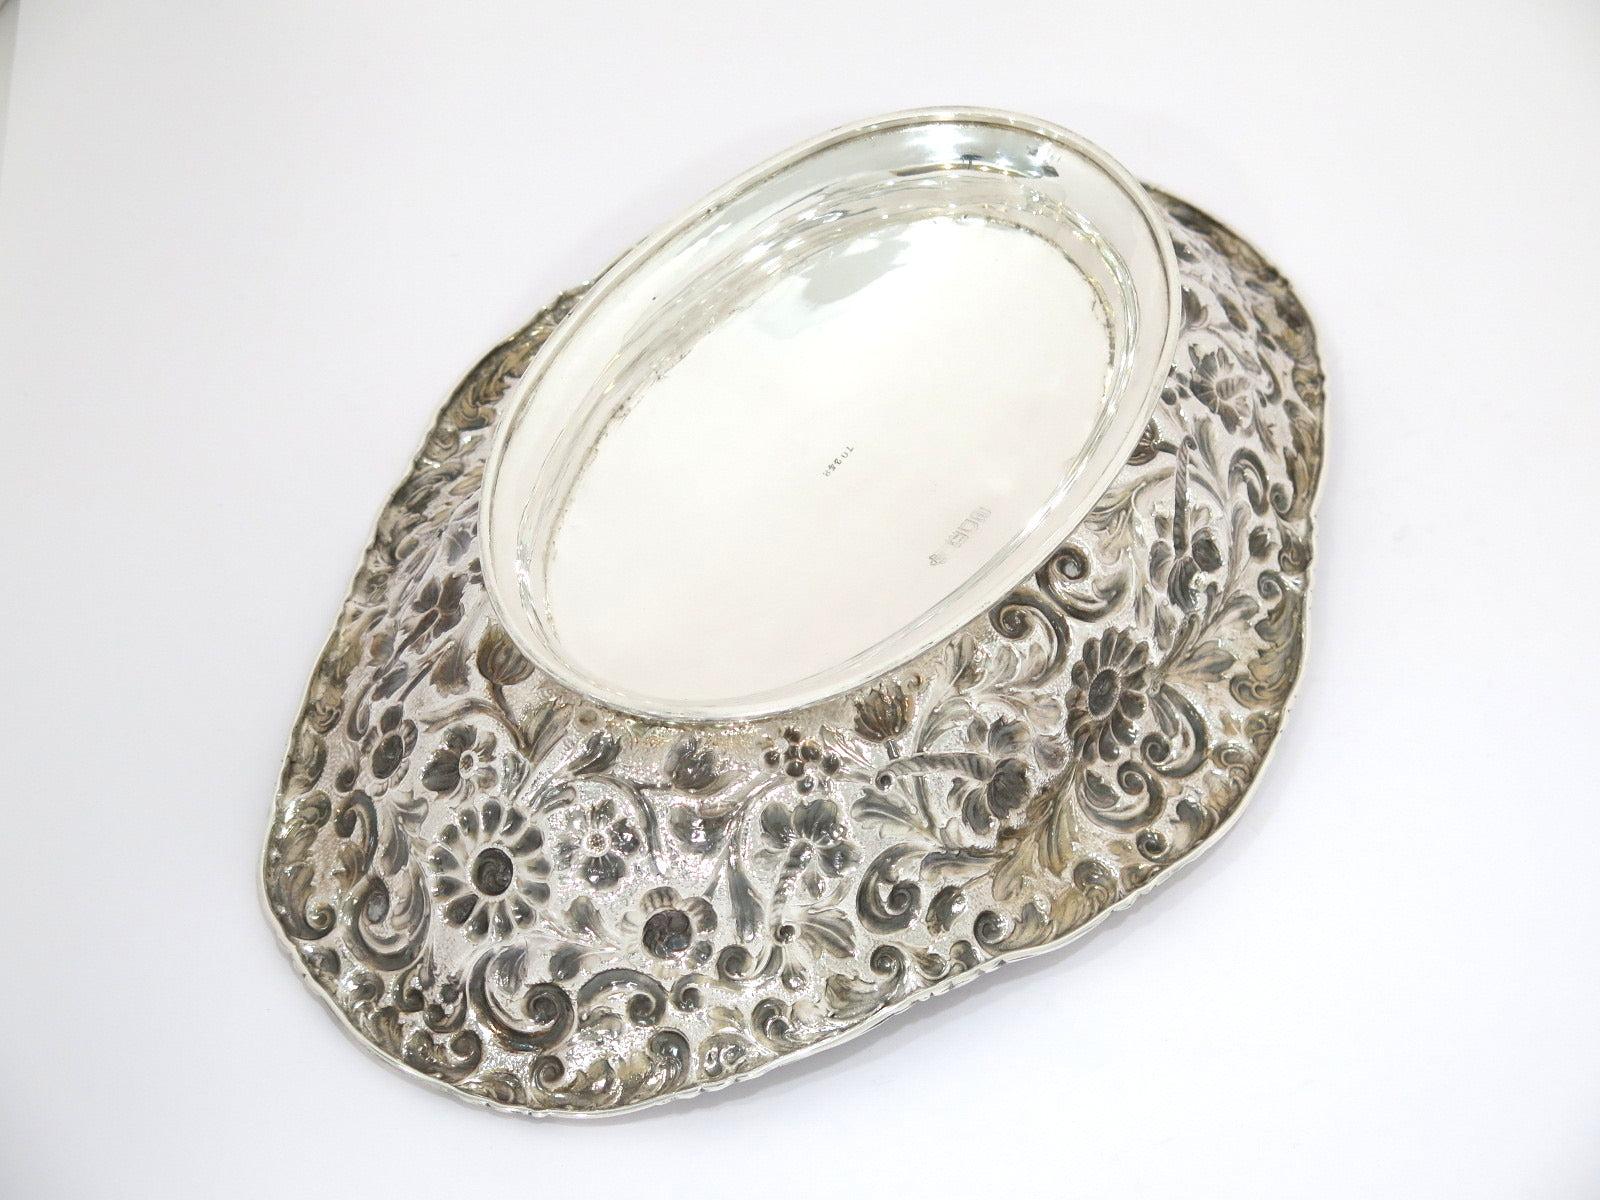 Pair of Sterling Silver Antique English Floral Repousse Footed Serving Bowls In Good Condition For Sale In Brooklyn, NY